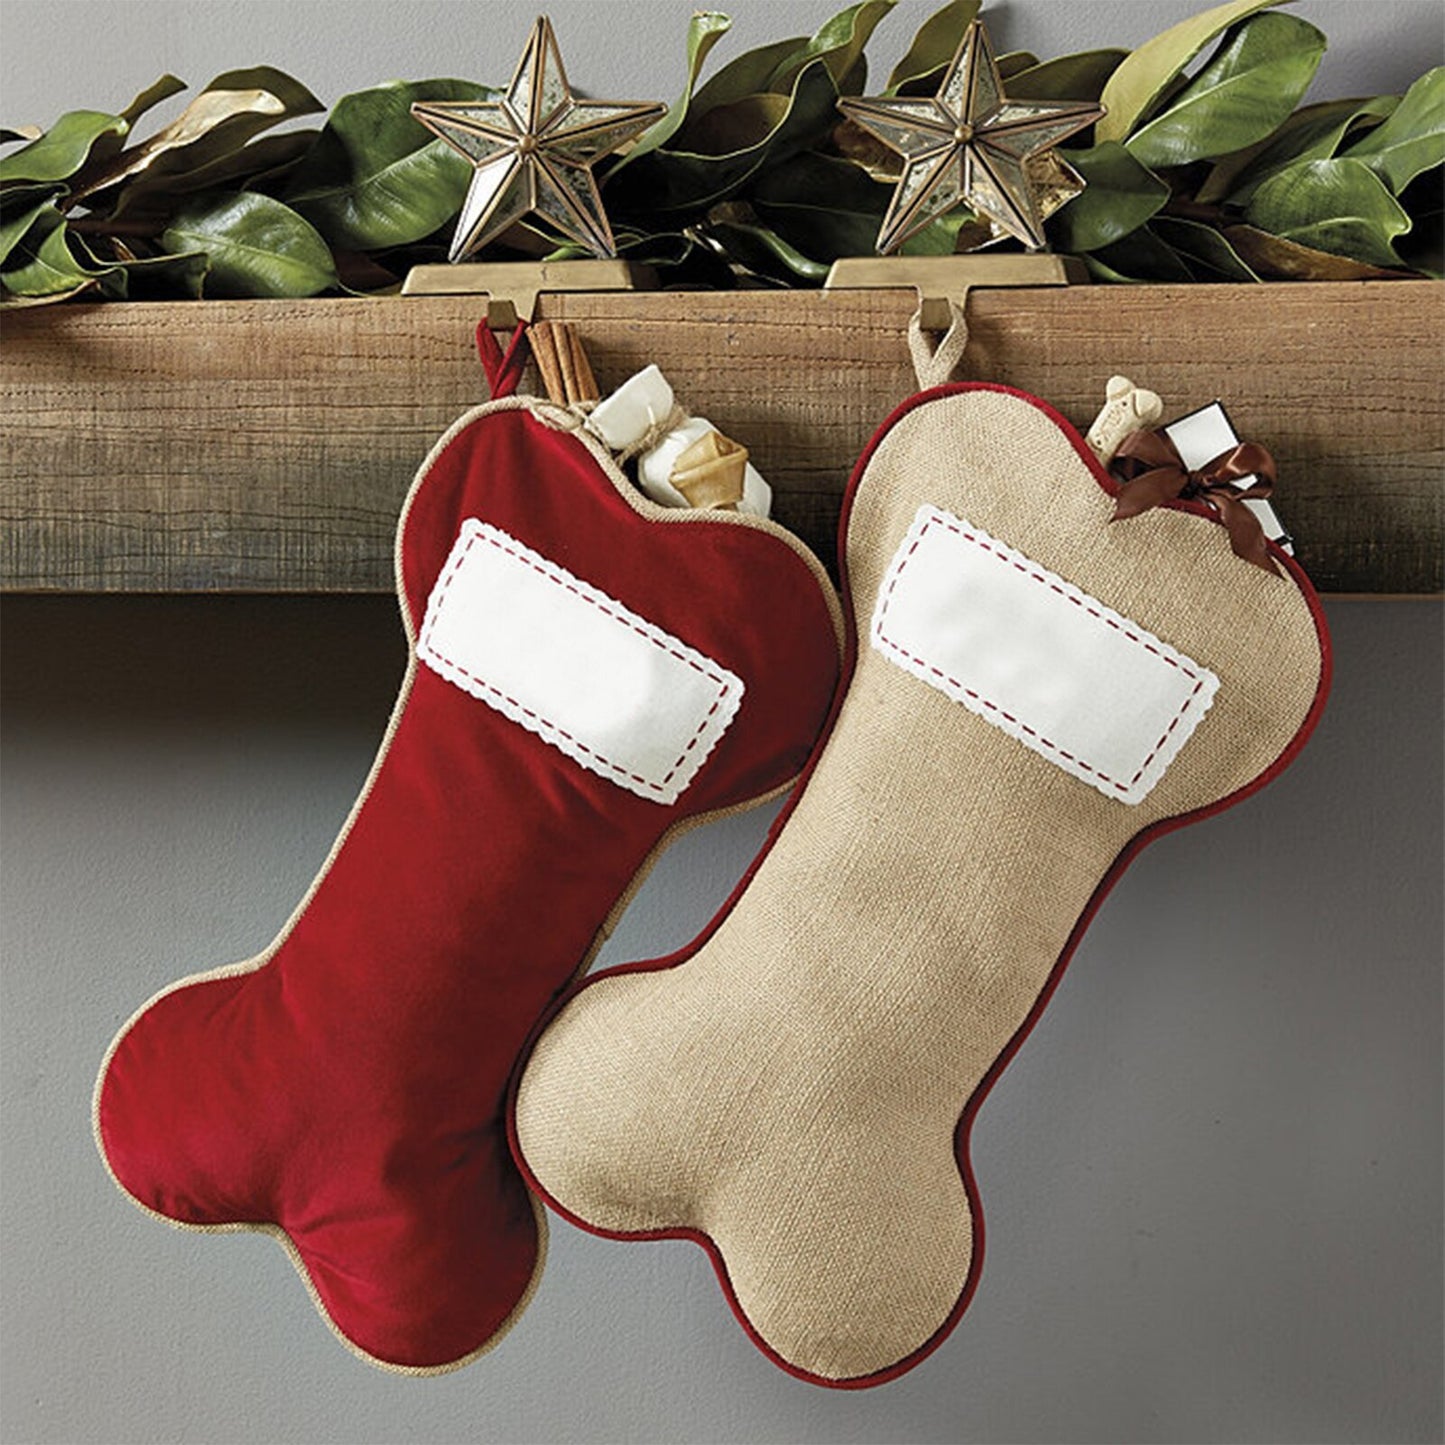 Large capacity bone-shaped Christmas stocking to hold lots of little gifts for your sweetheart